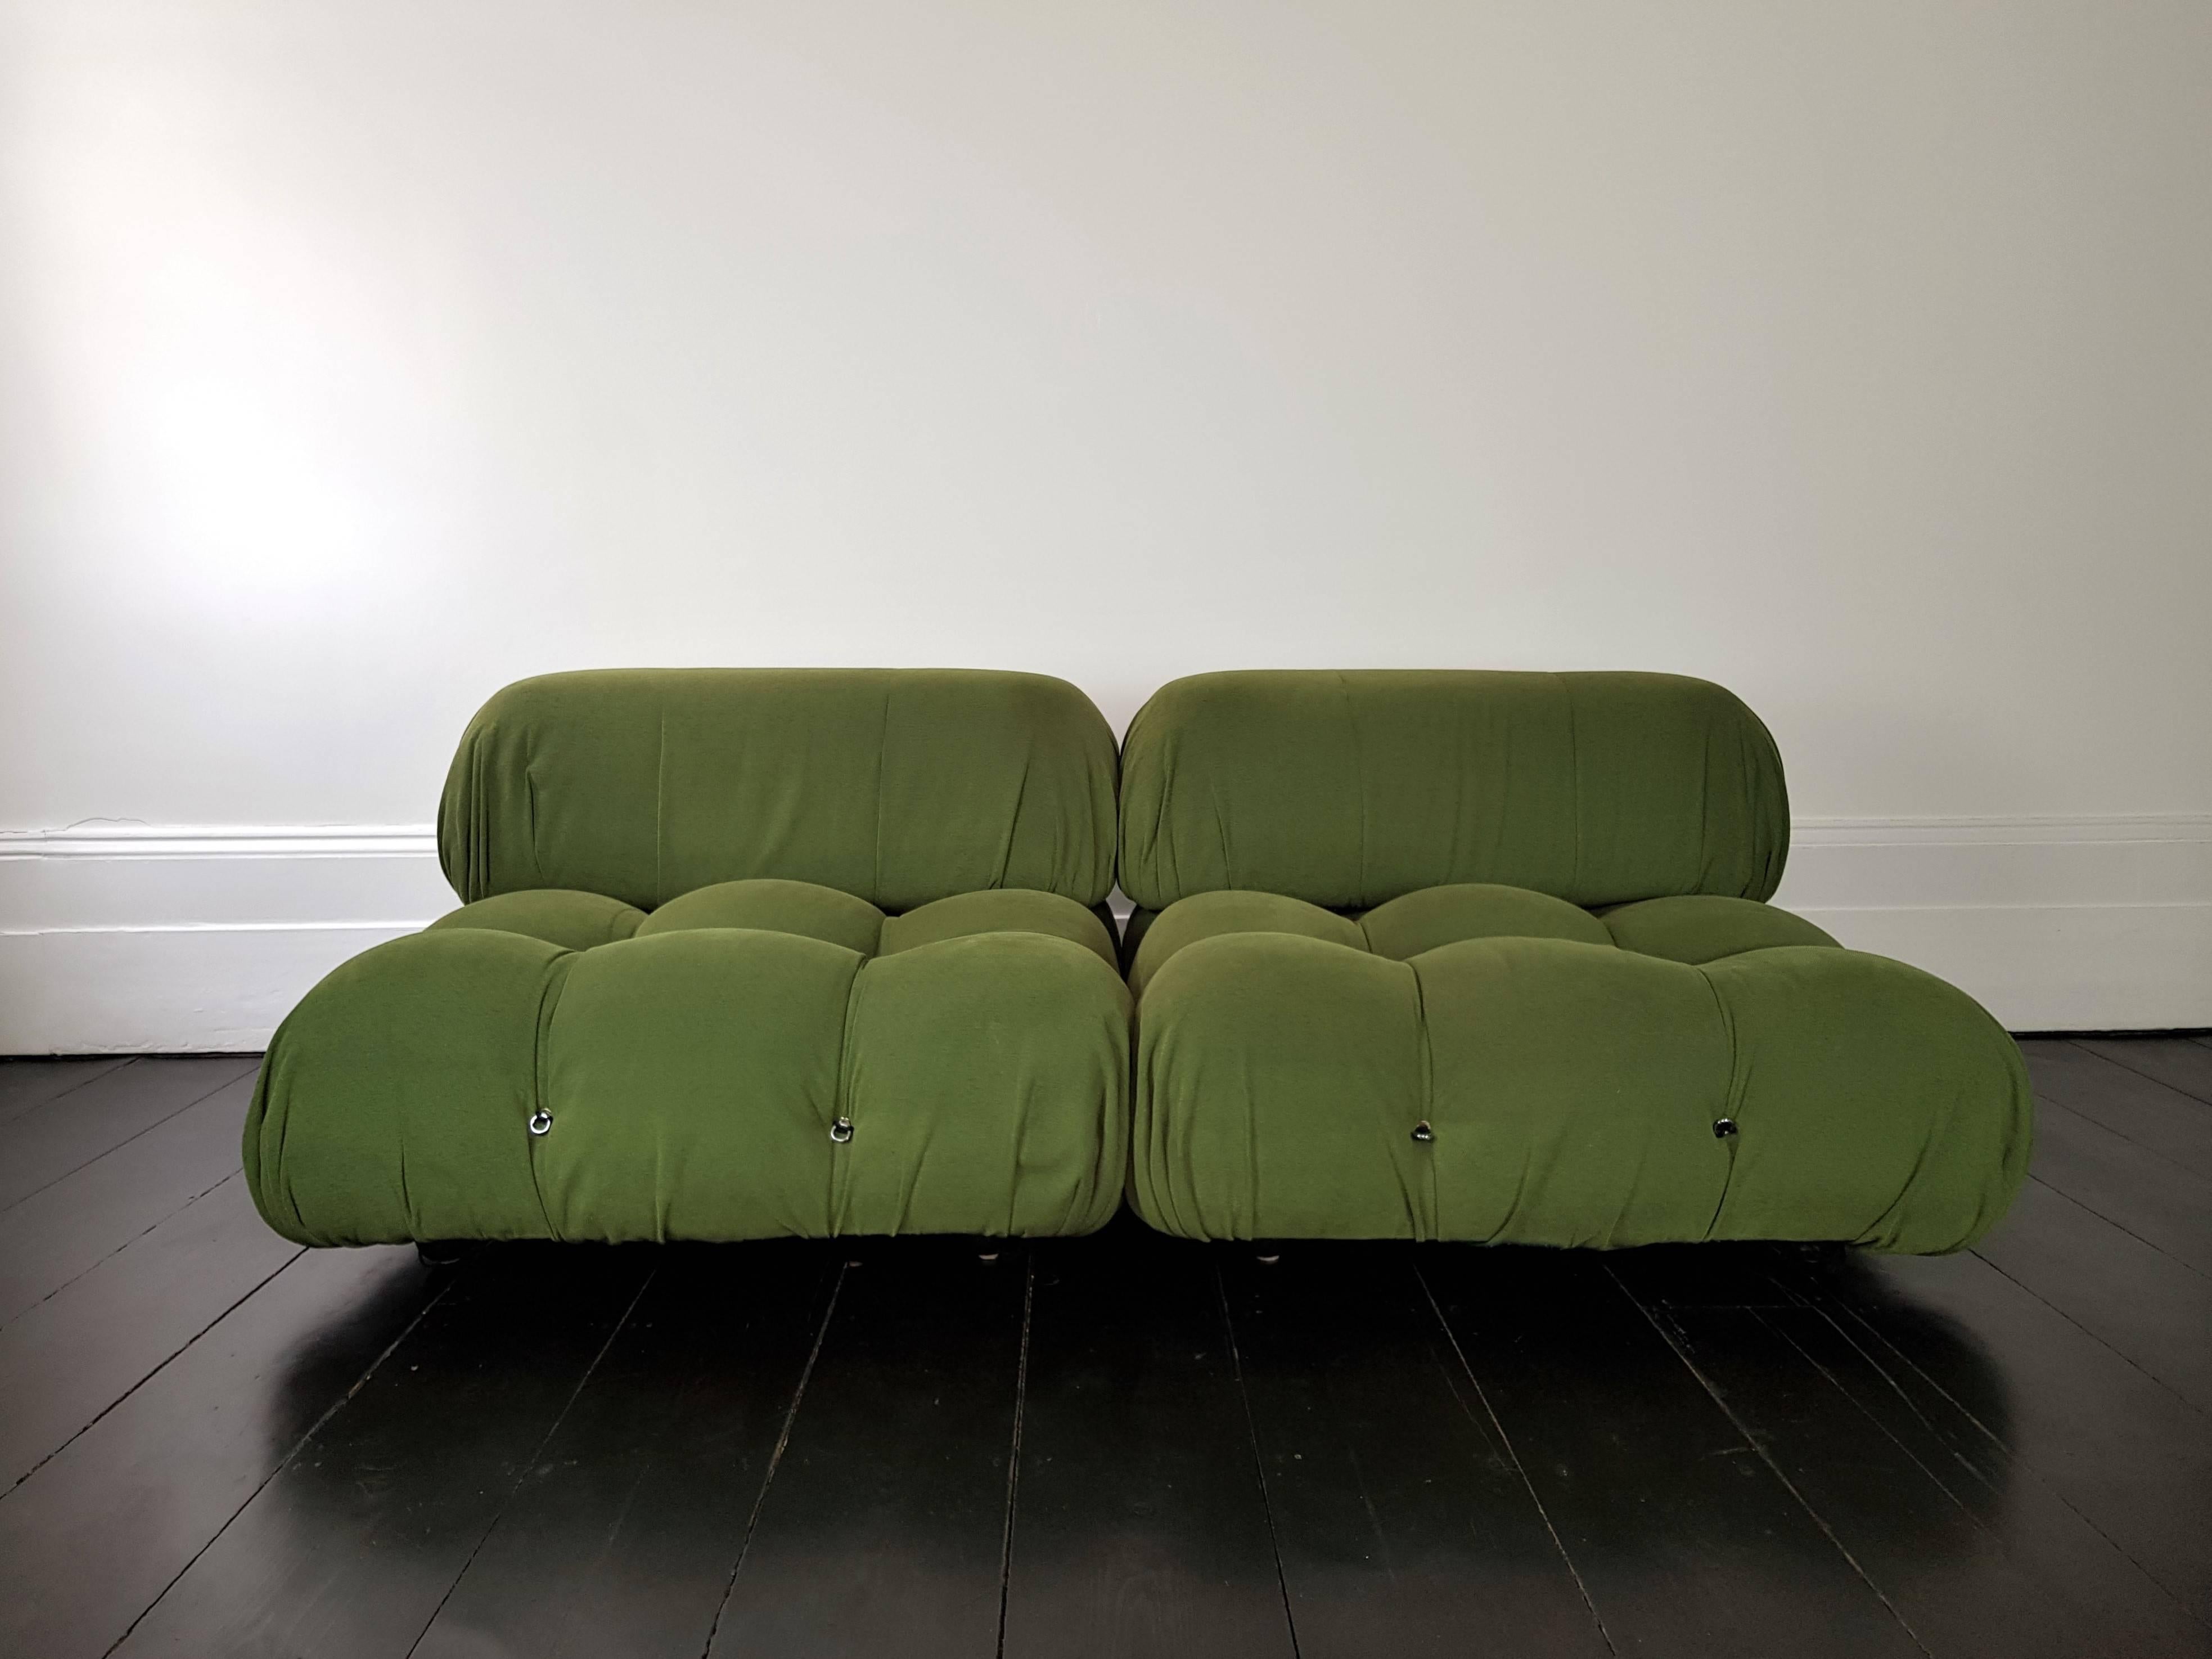 A Mario Bellini 'Camaleonda' with original green fabric, designed 1971.
 
The Camaleonda was designed by Mario Bellini in 1971 and was manufactured first by C&B and later by B&B Italia. This particular piece produced in 1976 by B&B Italia.

With